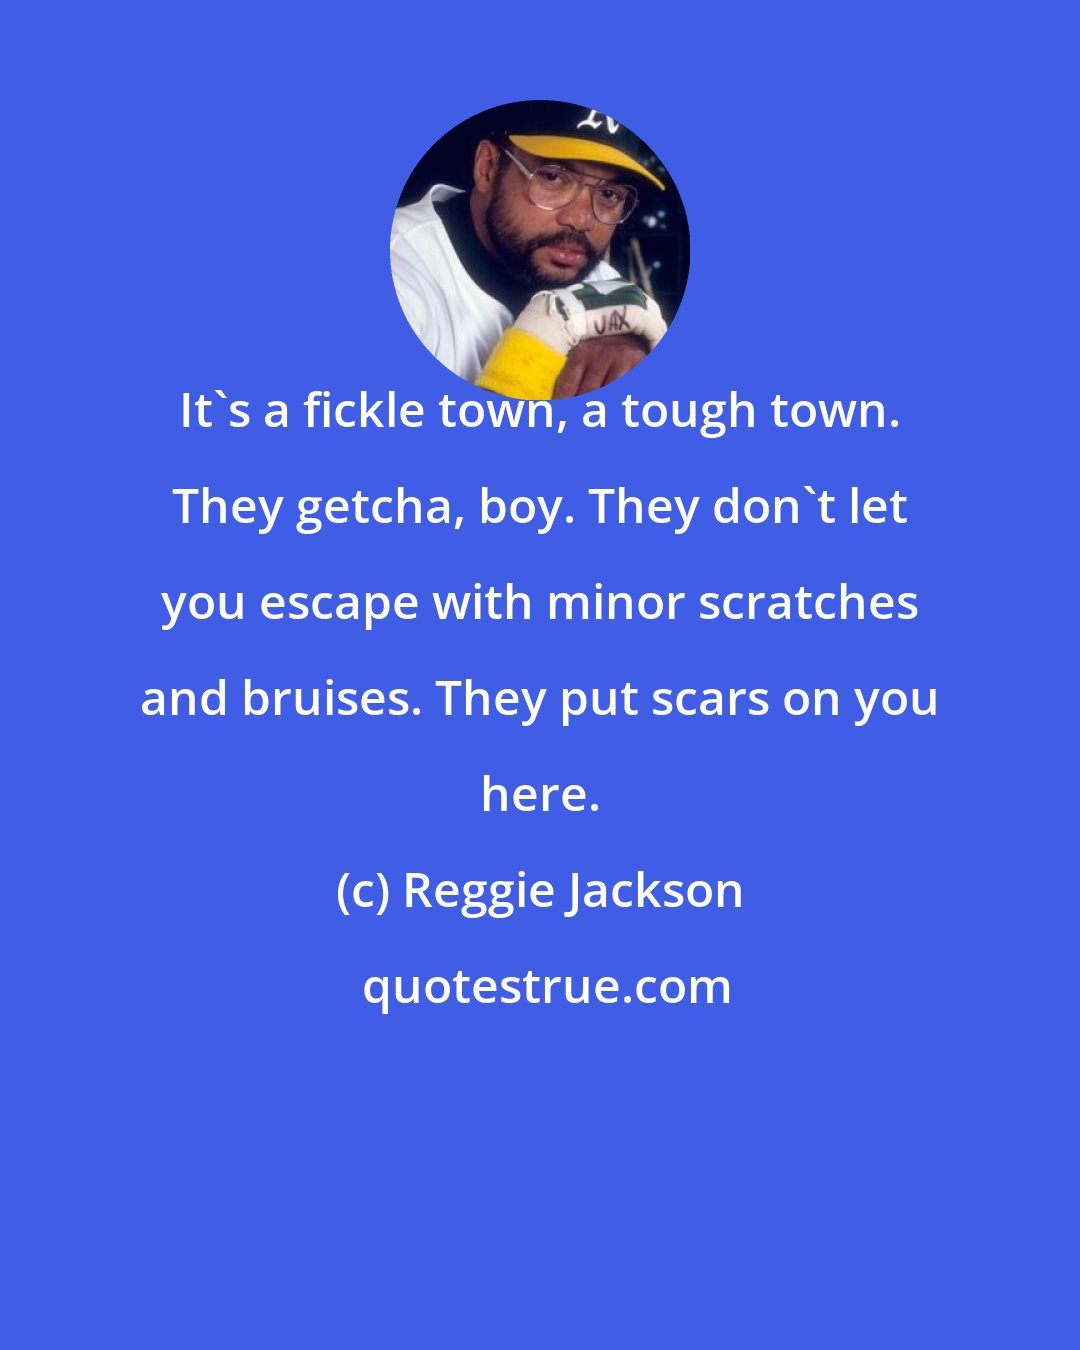 Reggie Jackson: It's a fickle town, a tough town. They getcha, boy. They don't let you escape with minor scratches and bruises. They put scars on you here.